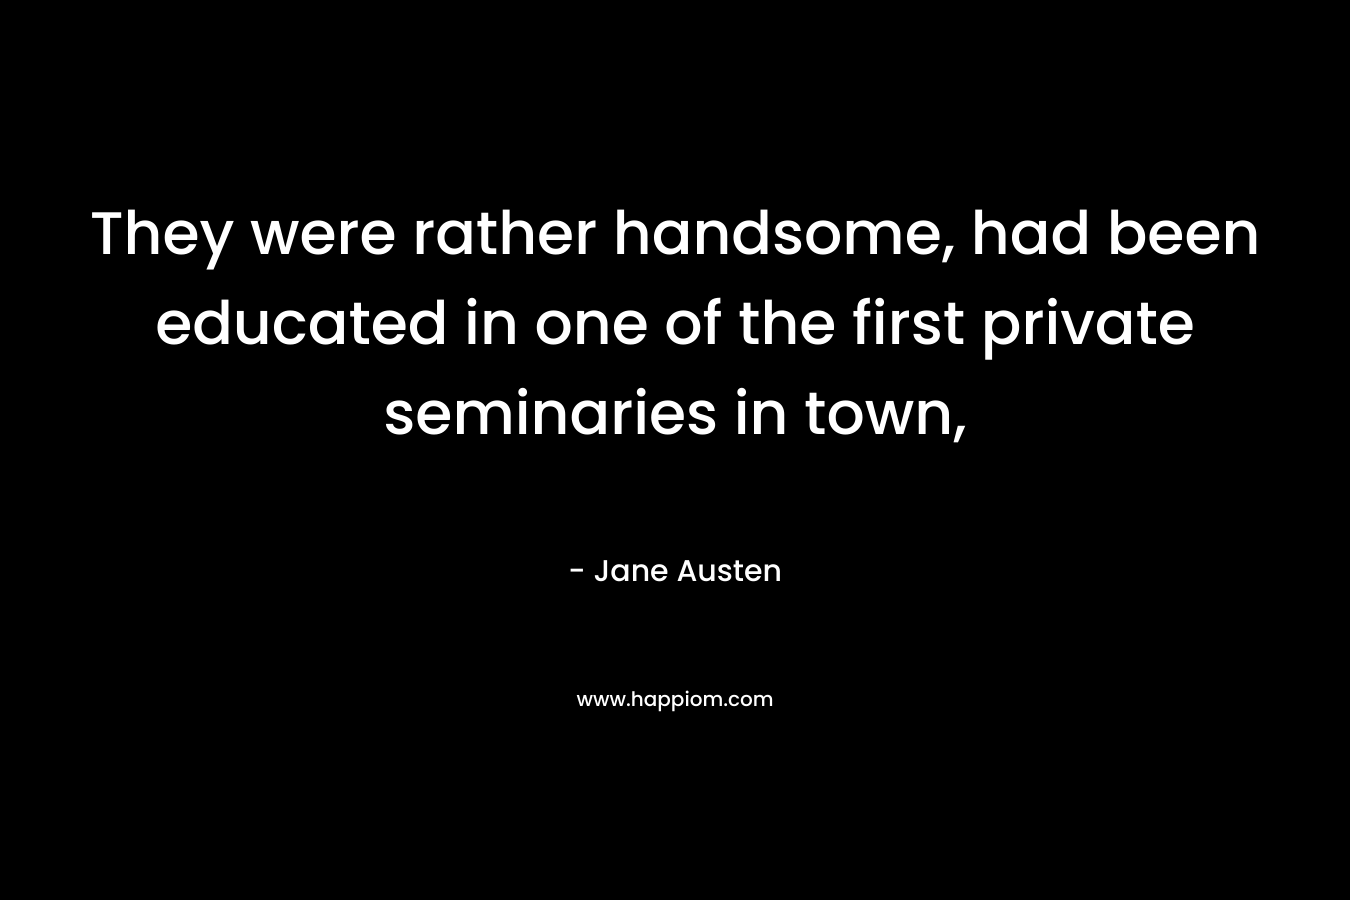 They were rather handsome, had been educated in one of the first private seminaries in town, – Jane Austen